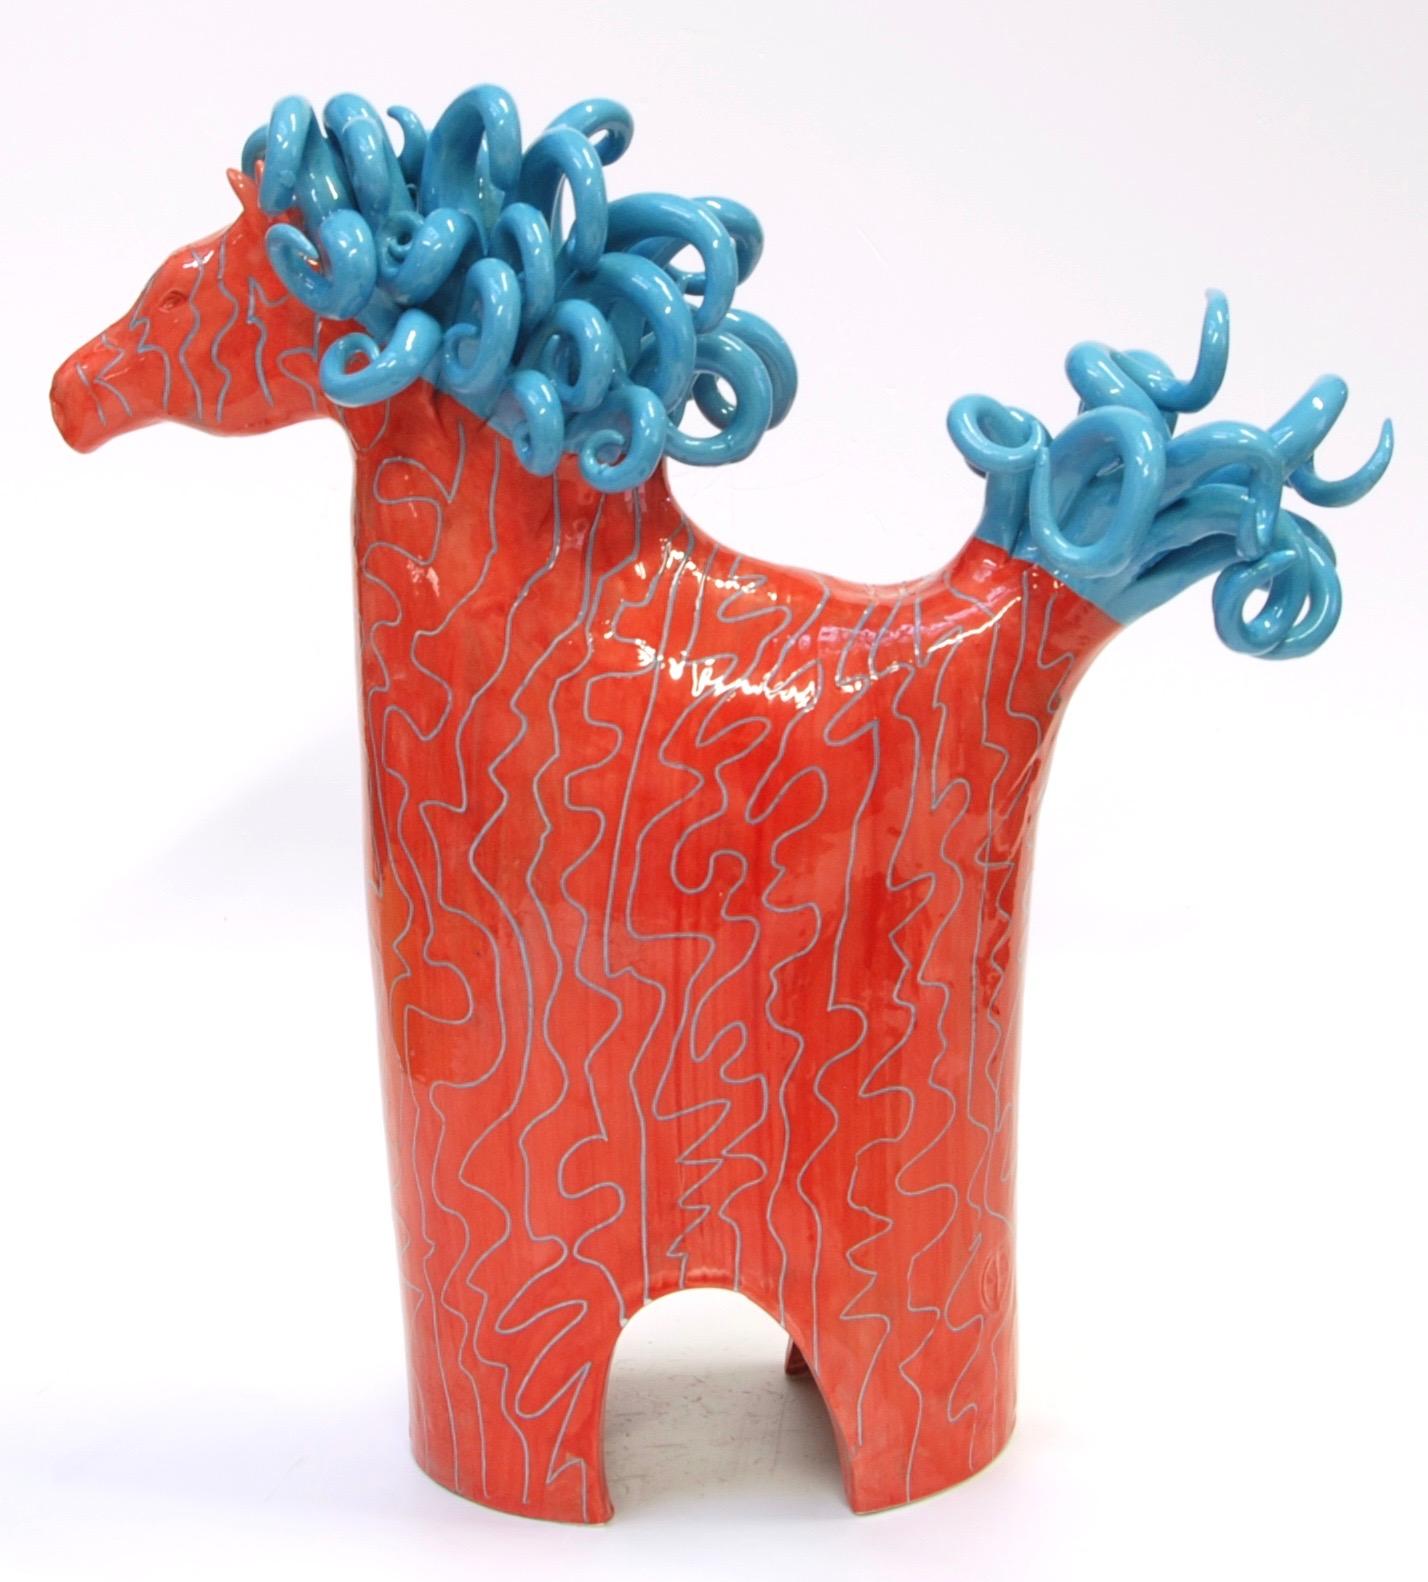 Modern Futurist Horses, Decorative Centerpiece Handmade Italy 2020, Hand-Crafted For Sale